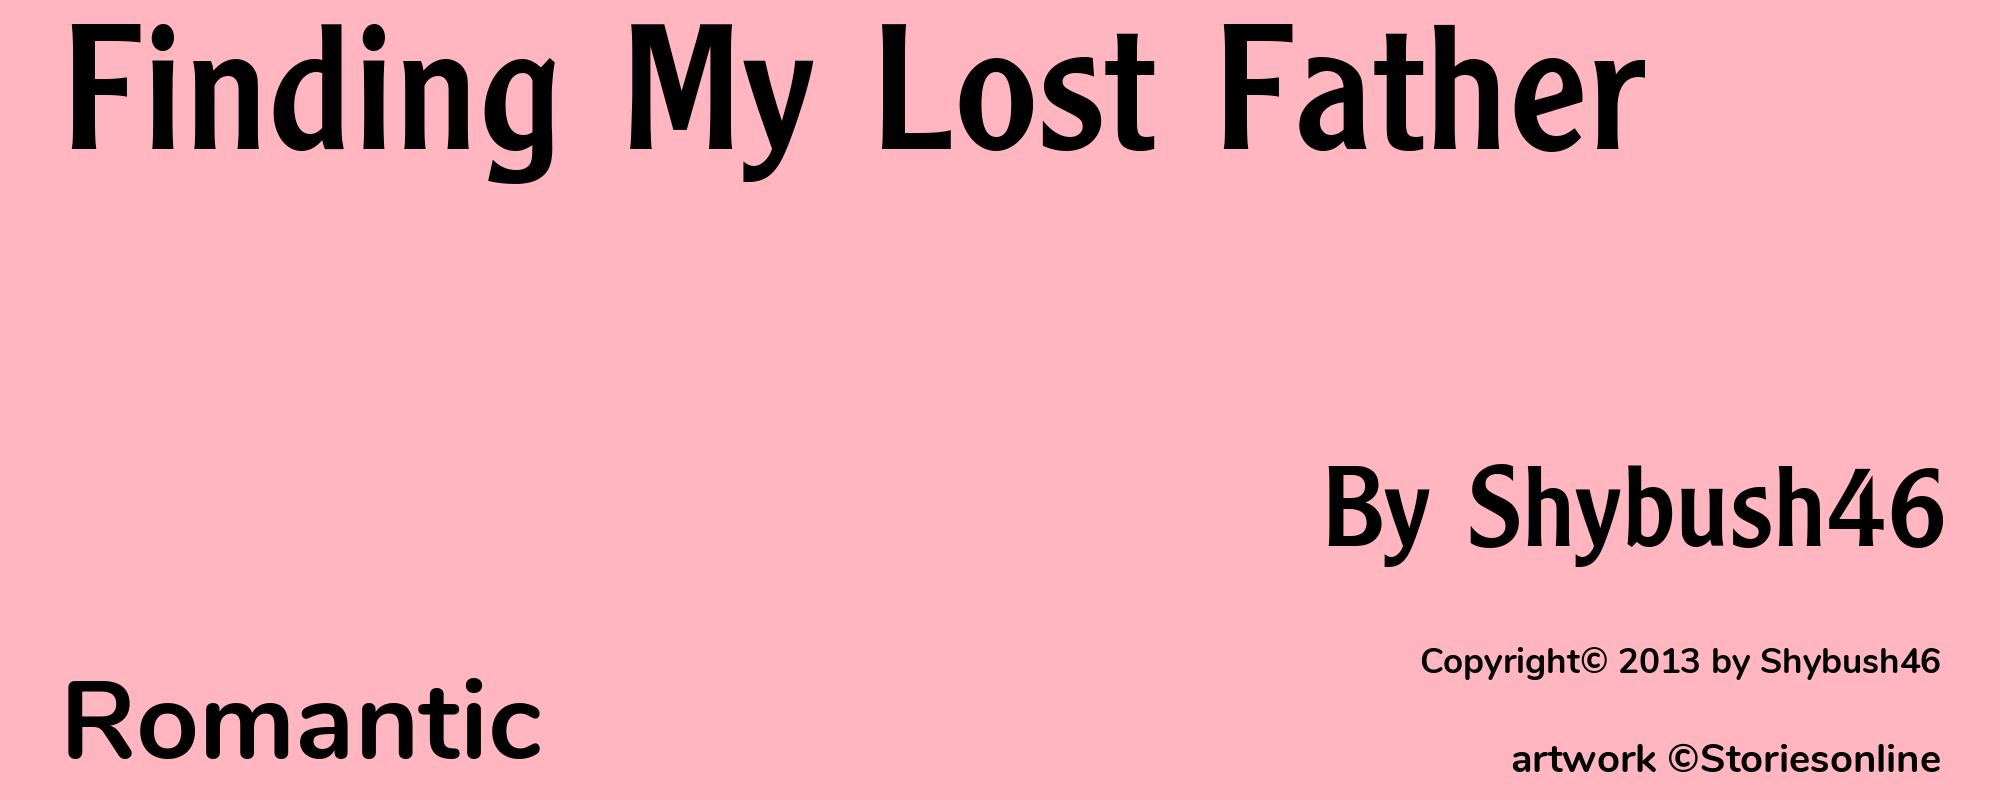 Finding My Lost Father - Cover